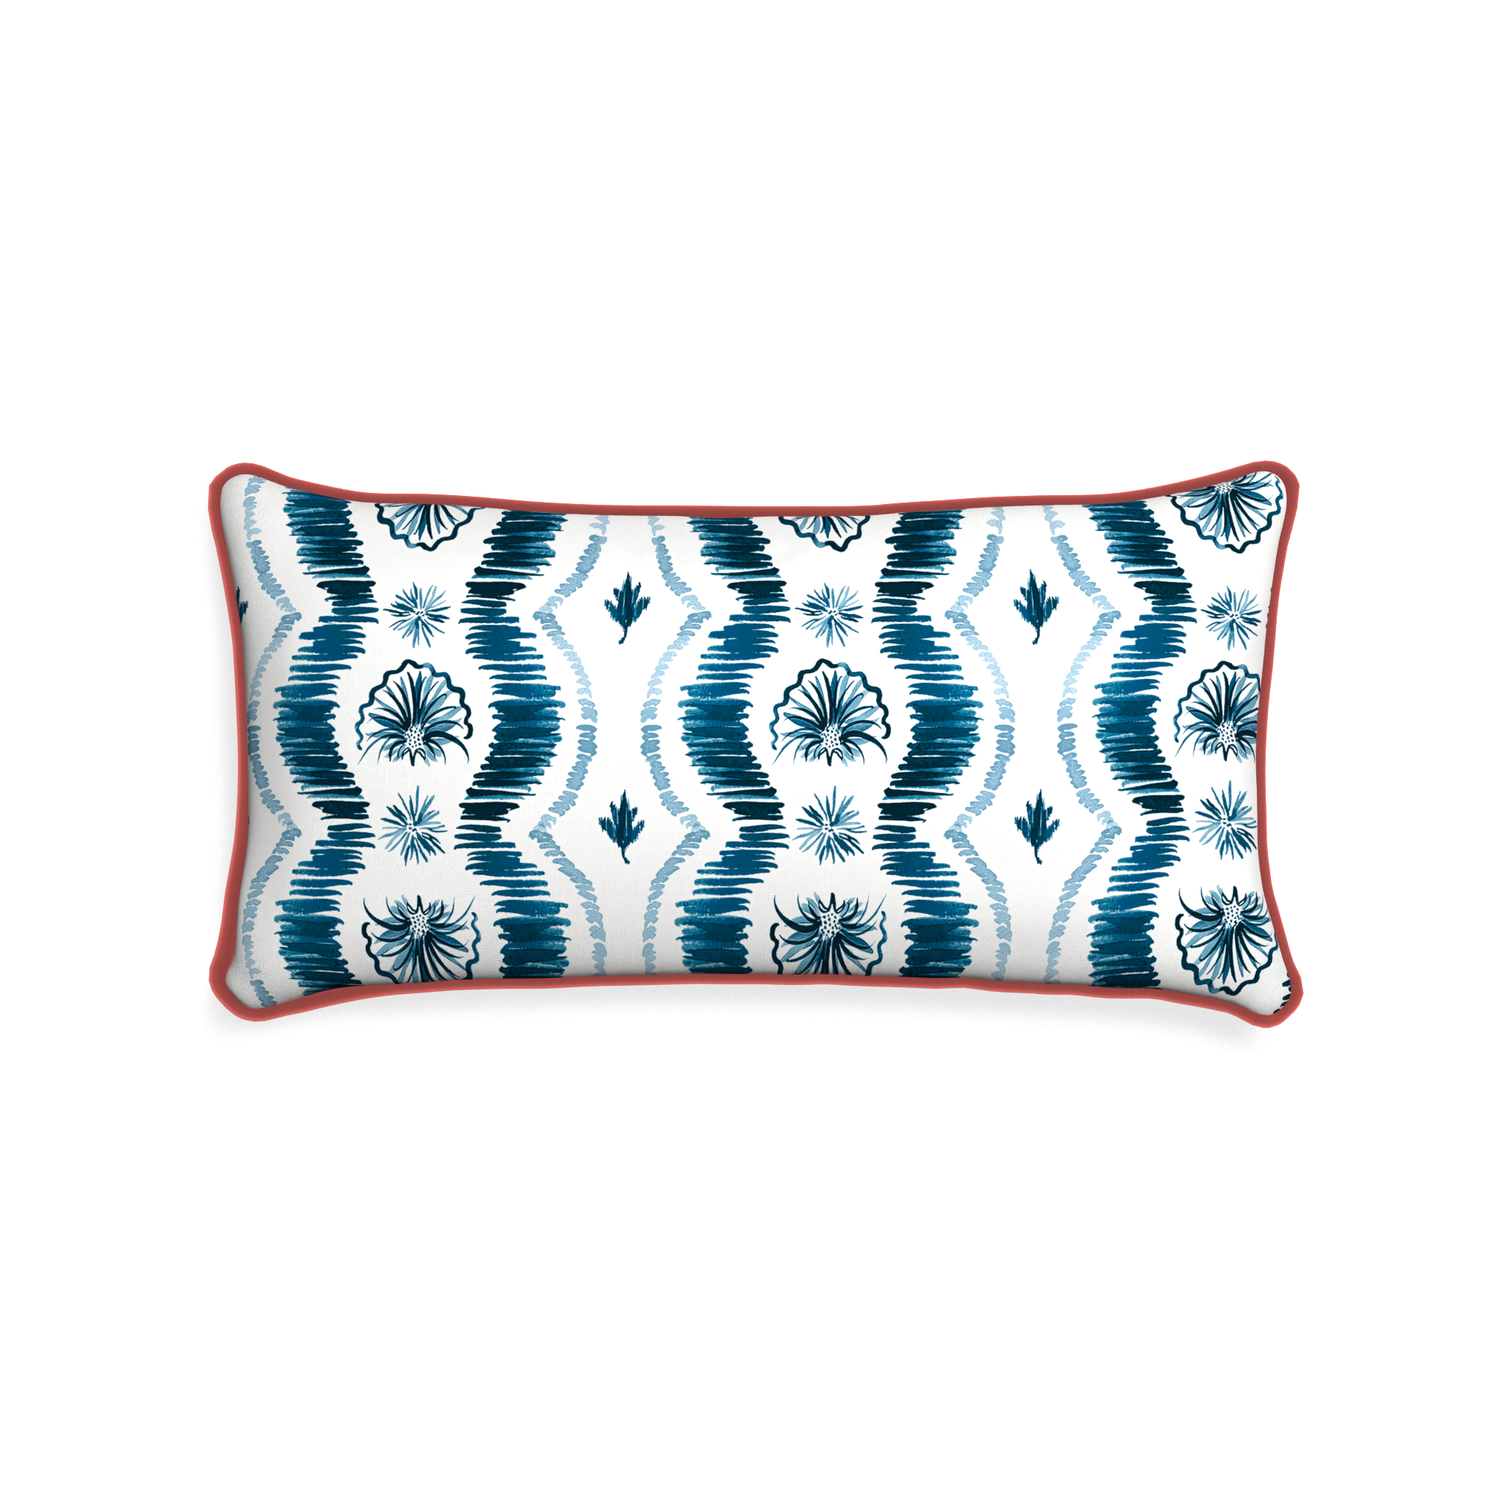 Midi-lumbar alice custom blue ikatpillow with c piping on white background